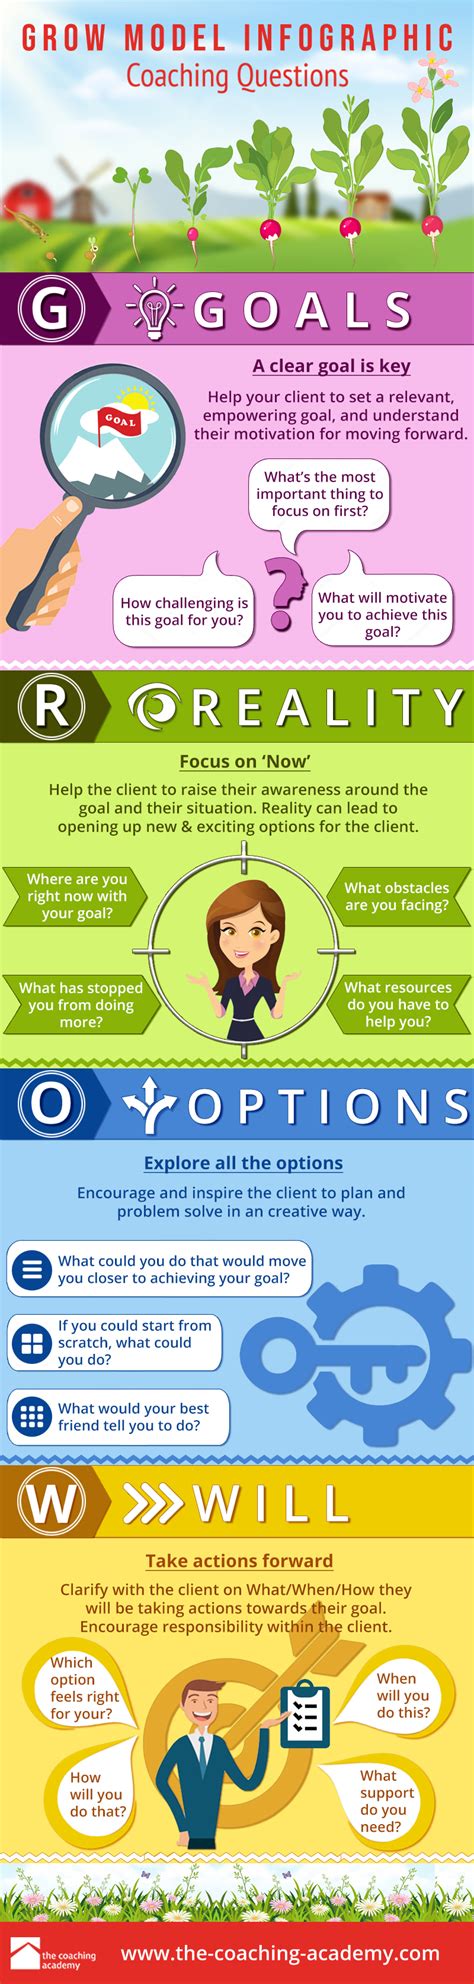 Infographic Grow Model Coaching Questions